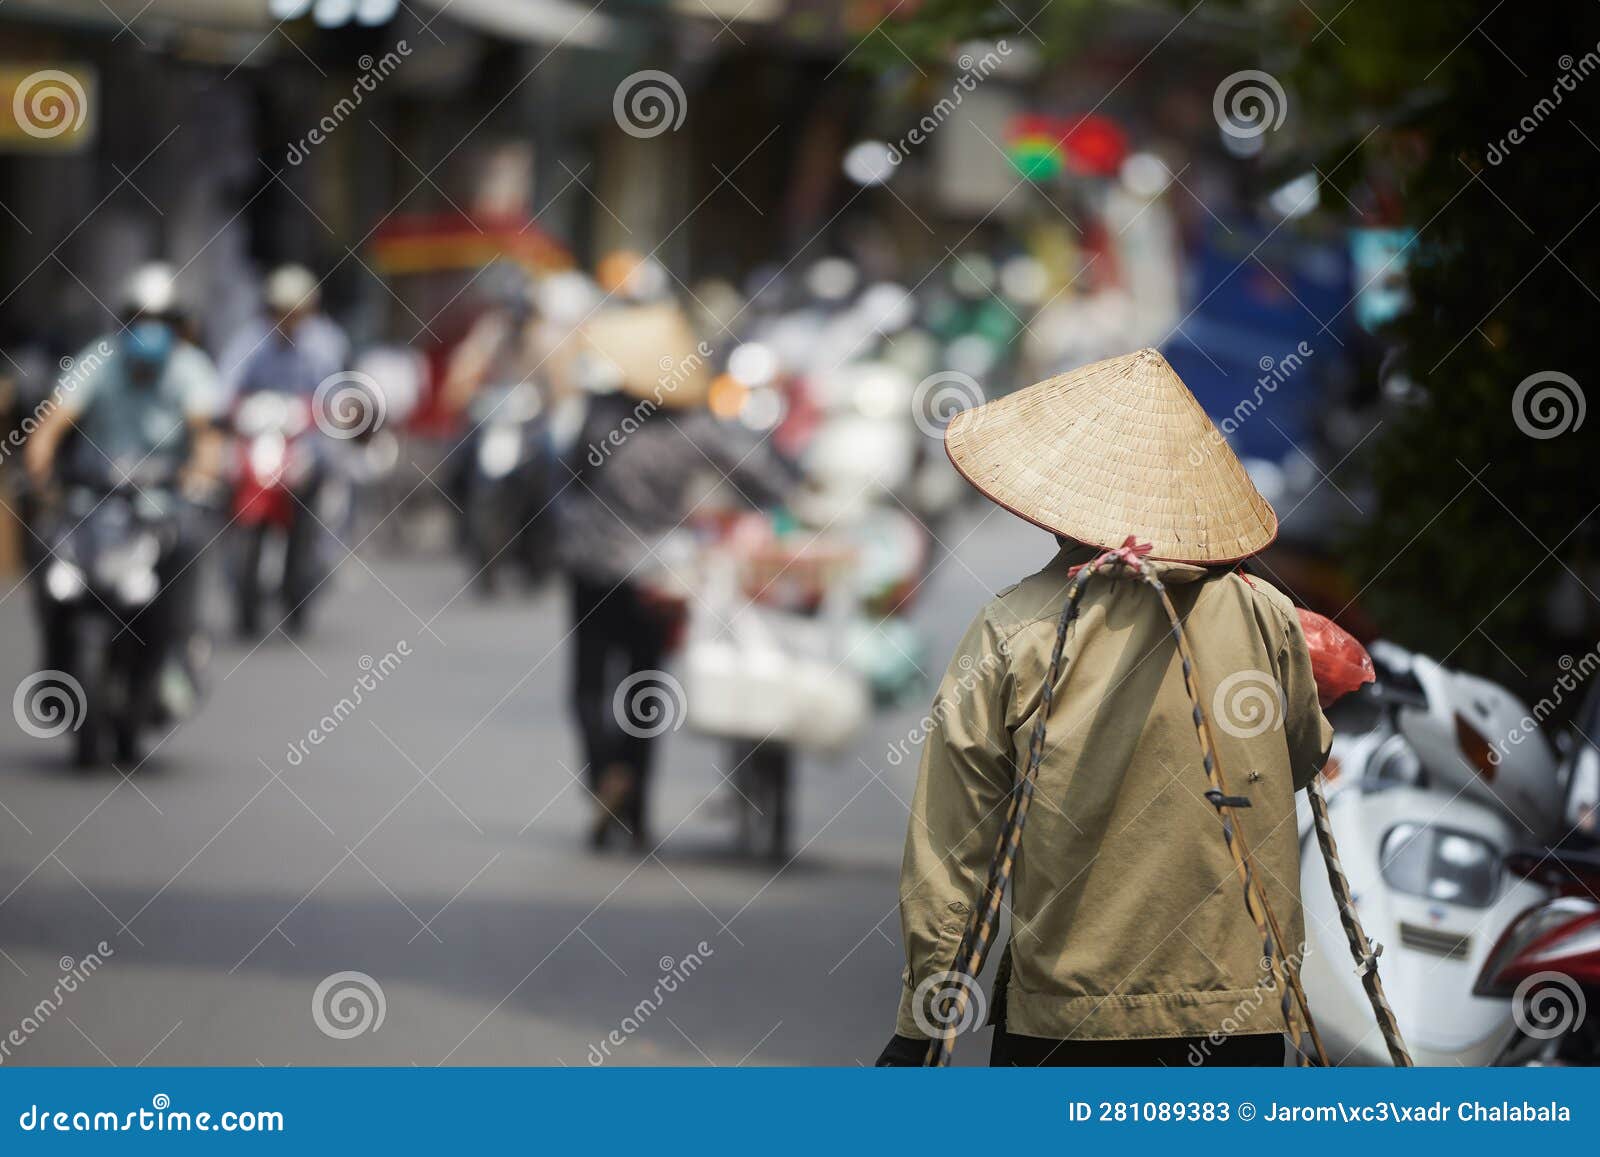 person with traditional conical hat against traffic motorbikes on busy street